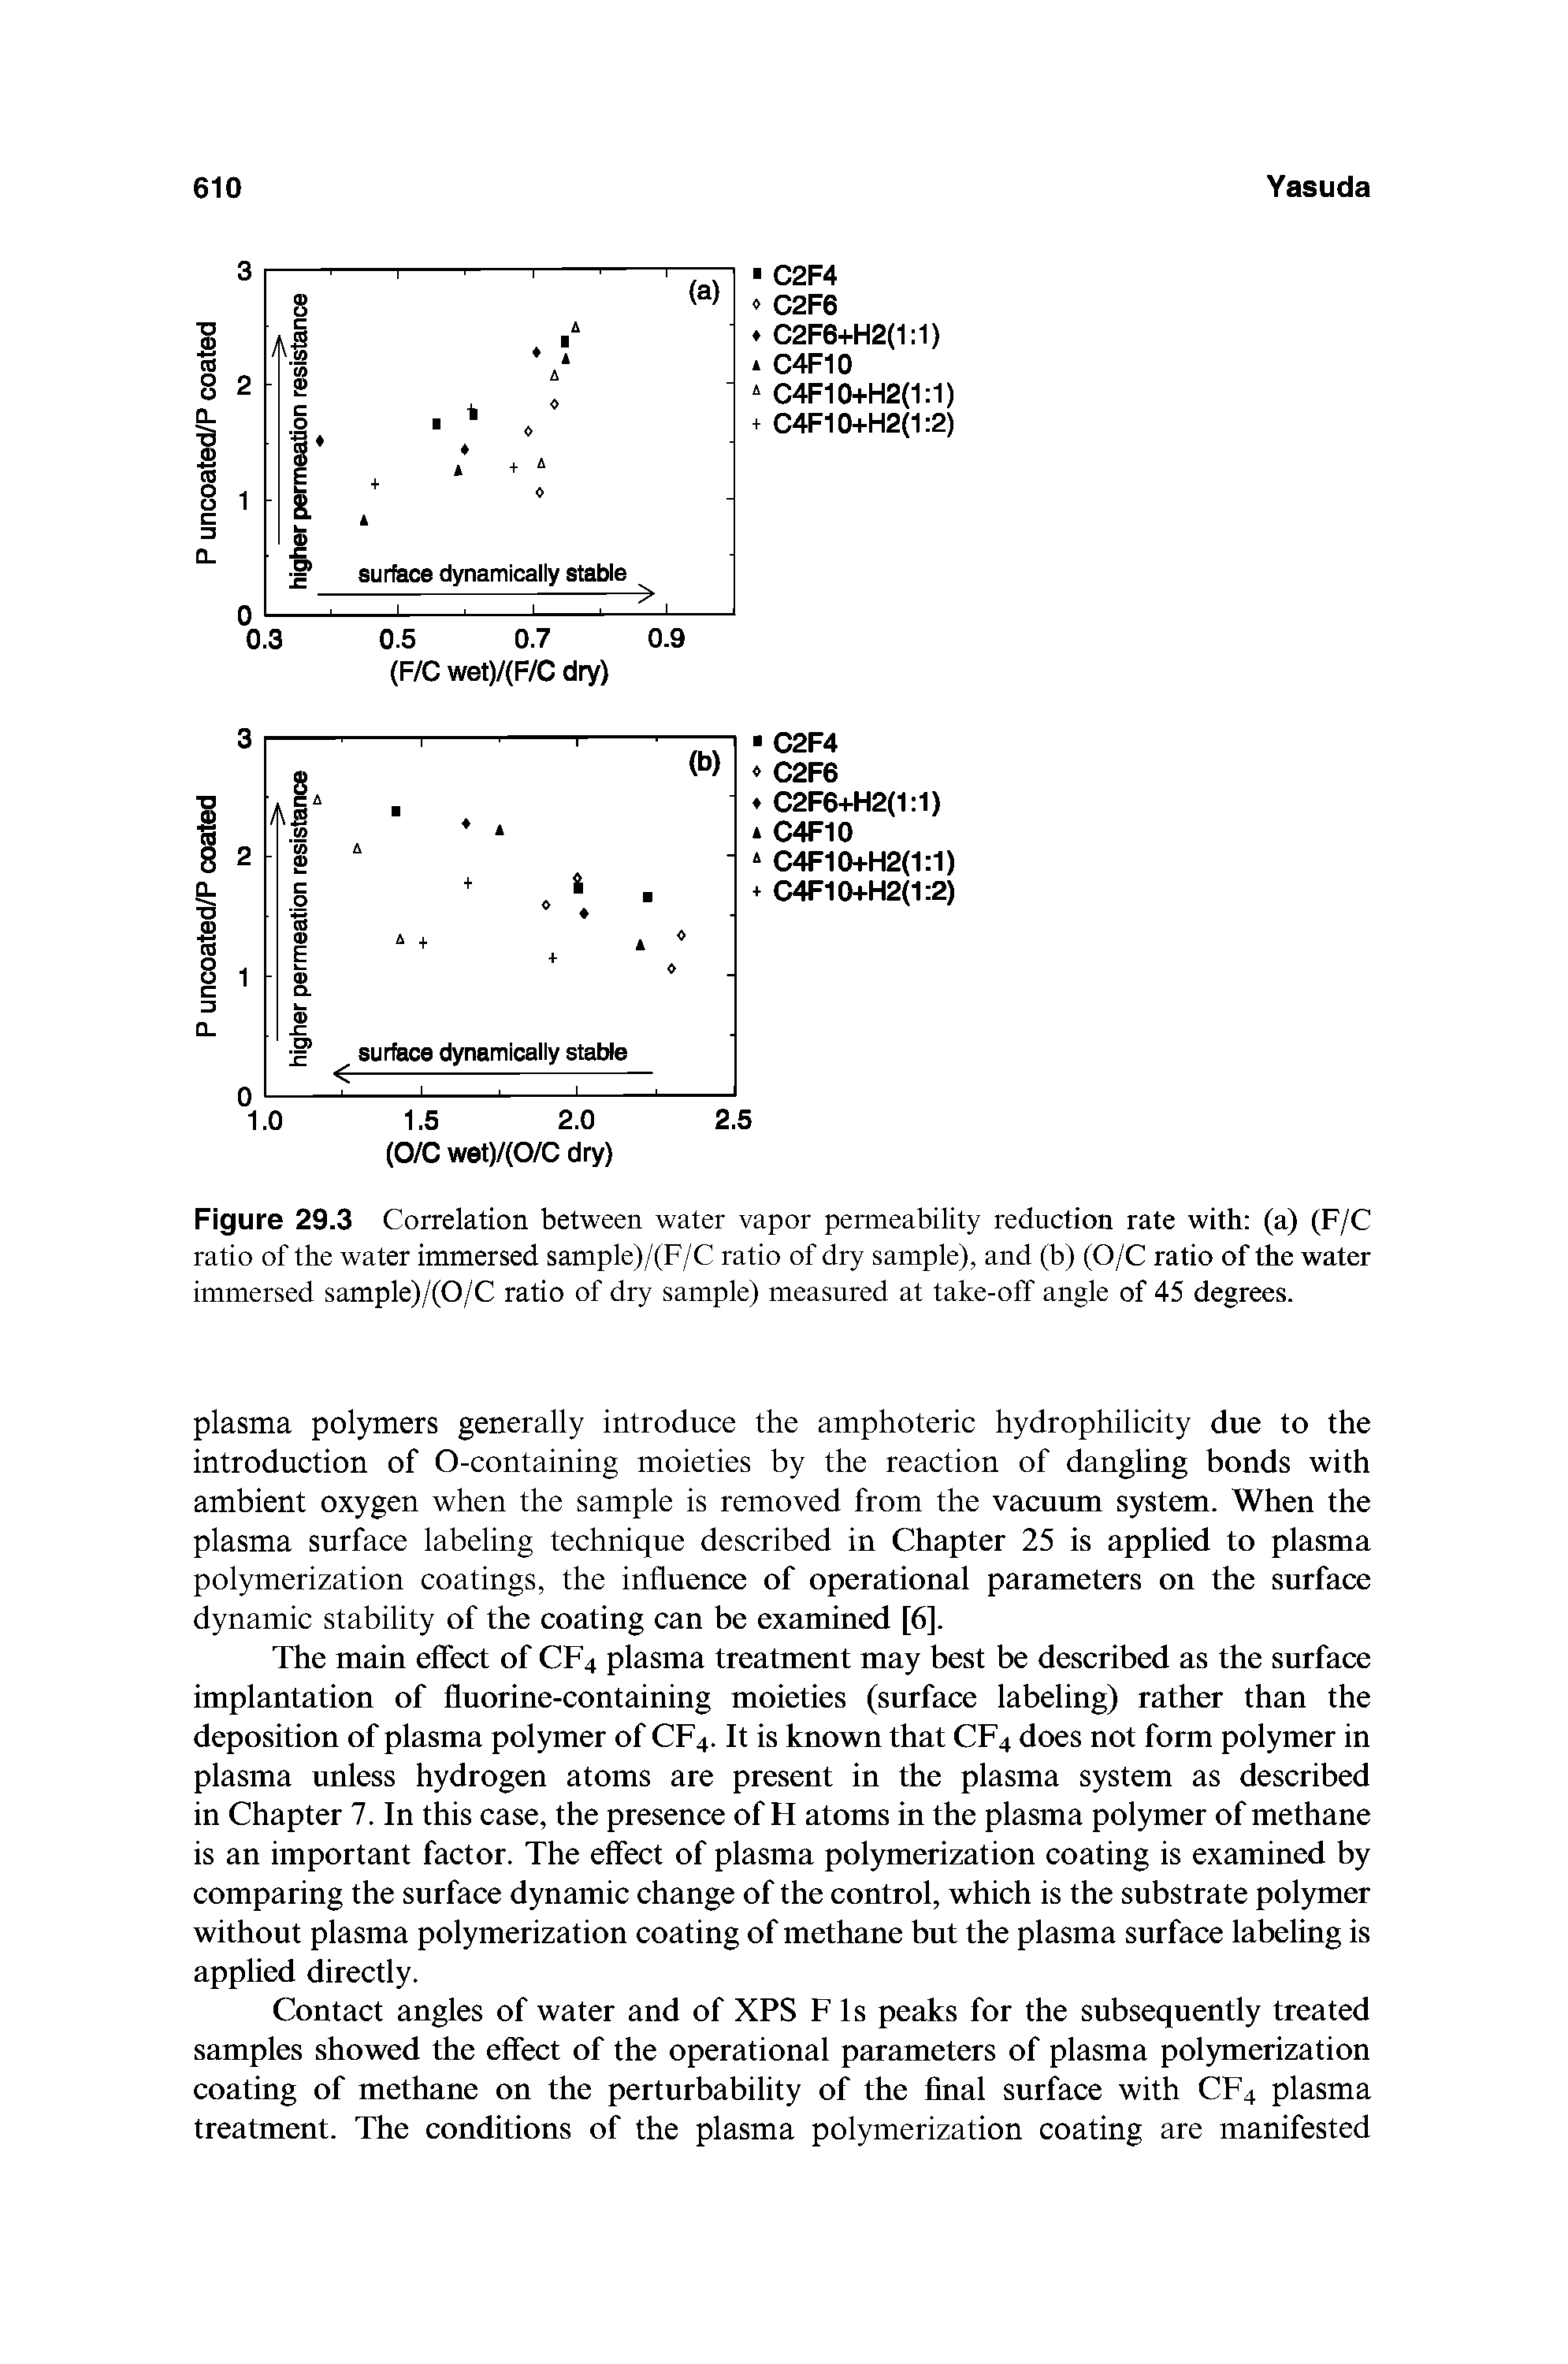 Figure 29.3 Correlation between water vapor permeability reduction rate with (a) (F/C ratio of the water immersed sample)/(F/C ratio of dry sample), and (b) (O/C ratio of the water immersed sample)/(0/C ratio of dry sample) measured at take-off angle of 45 degrees.